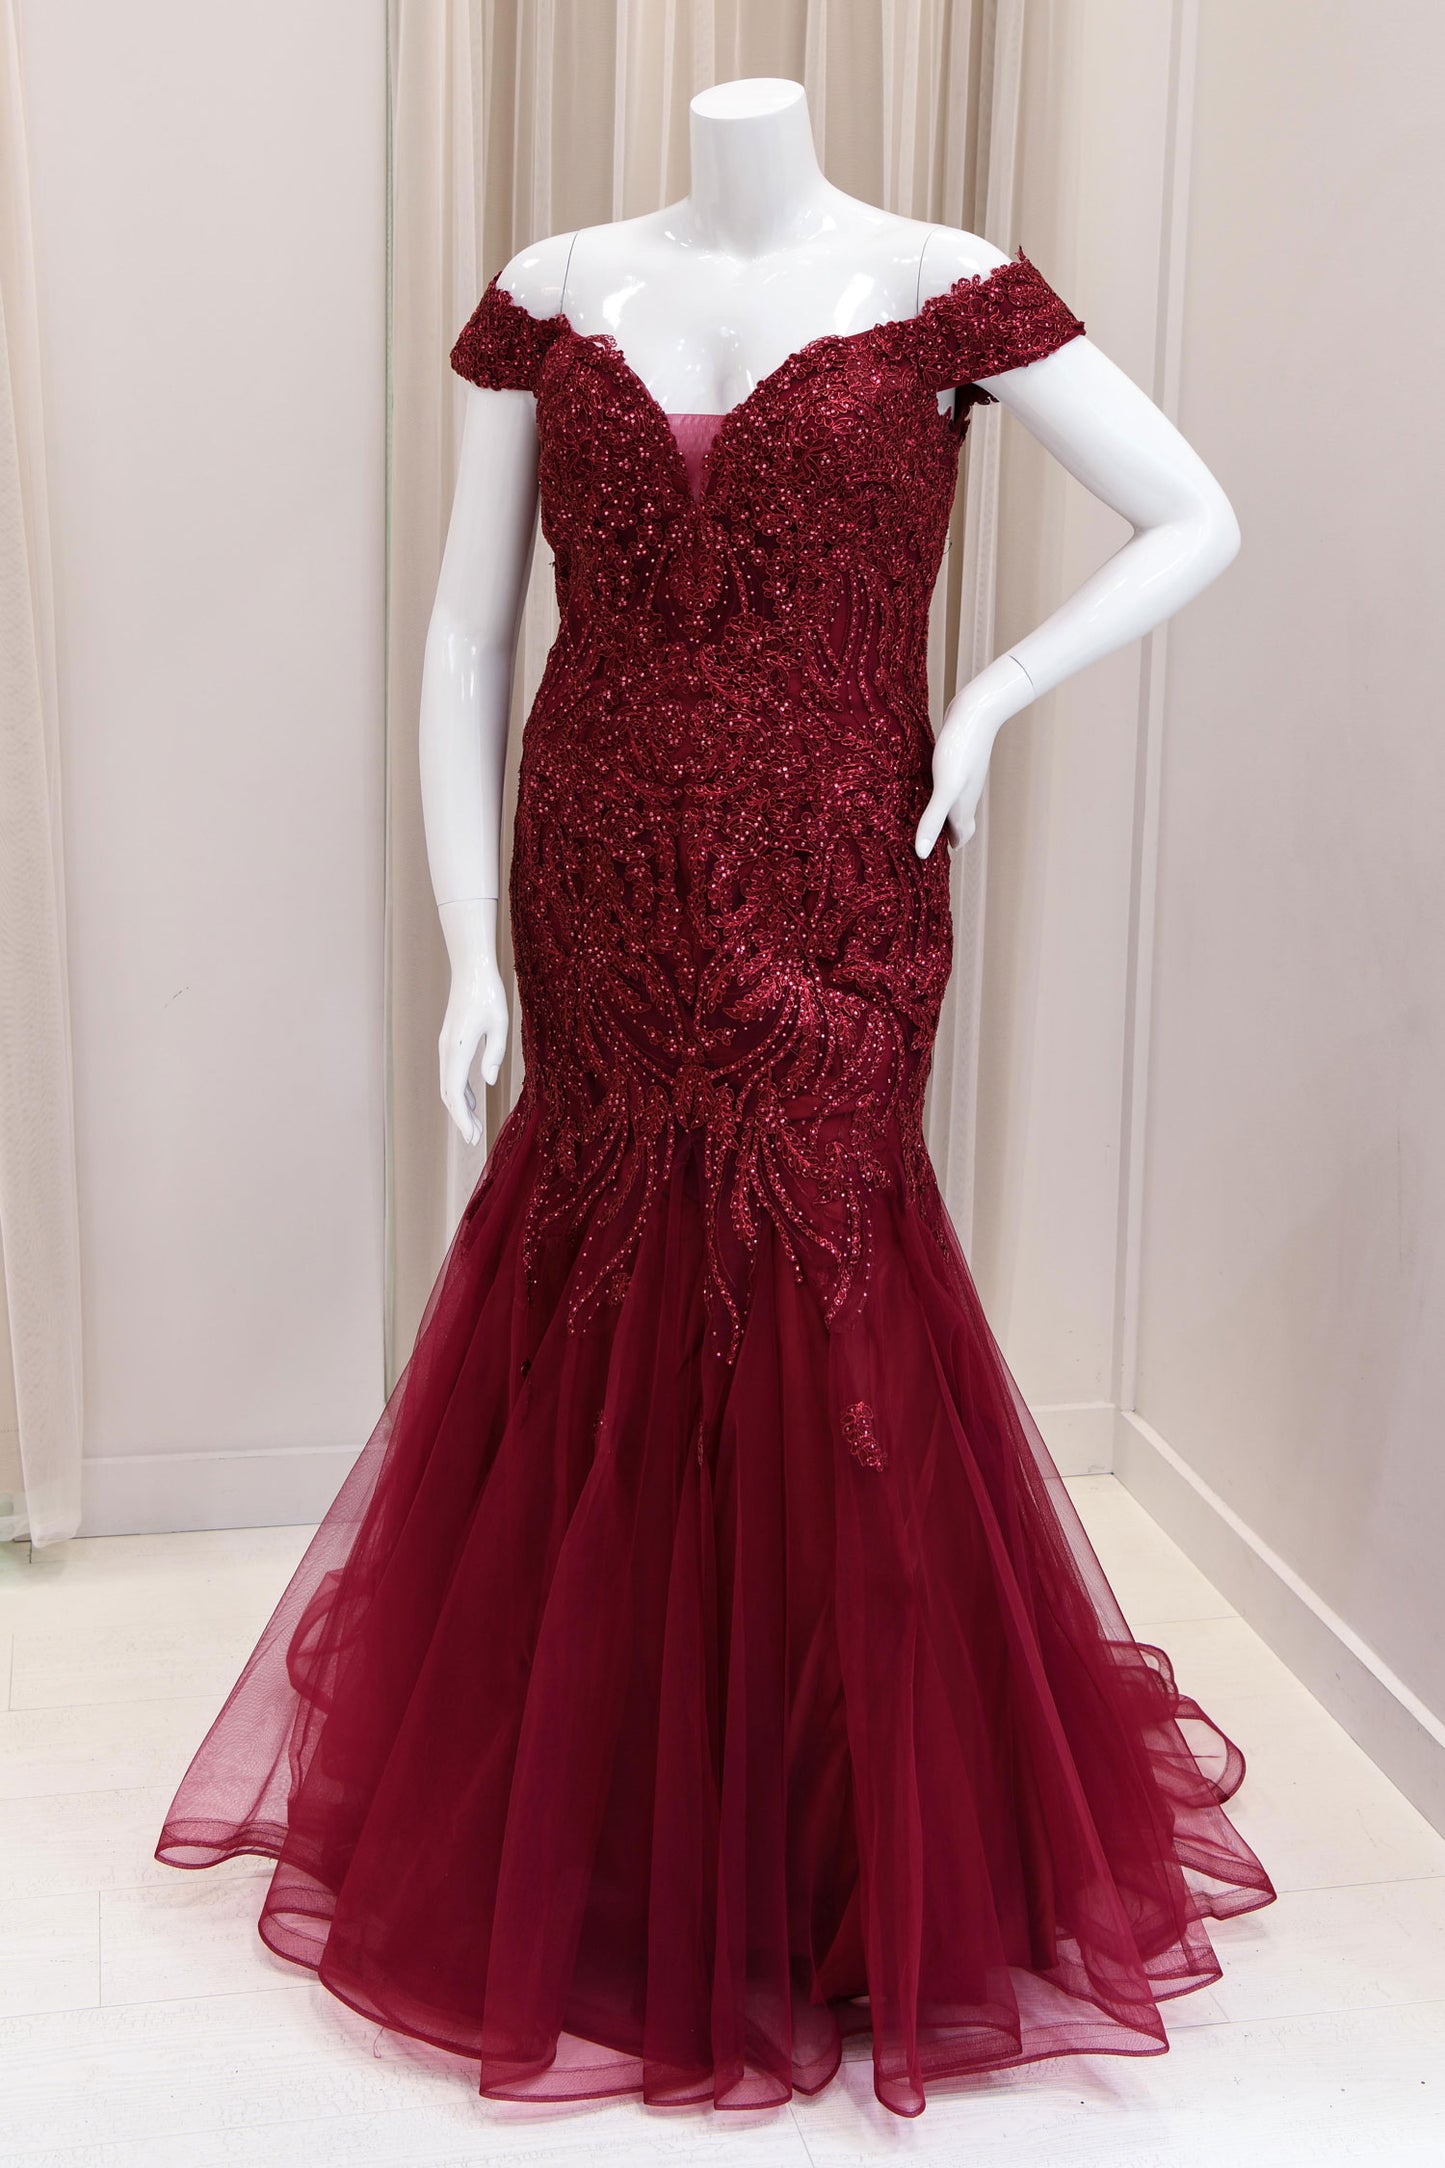 Allona Embroidered Mermaid Evening Gown in Burgundy